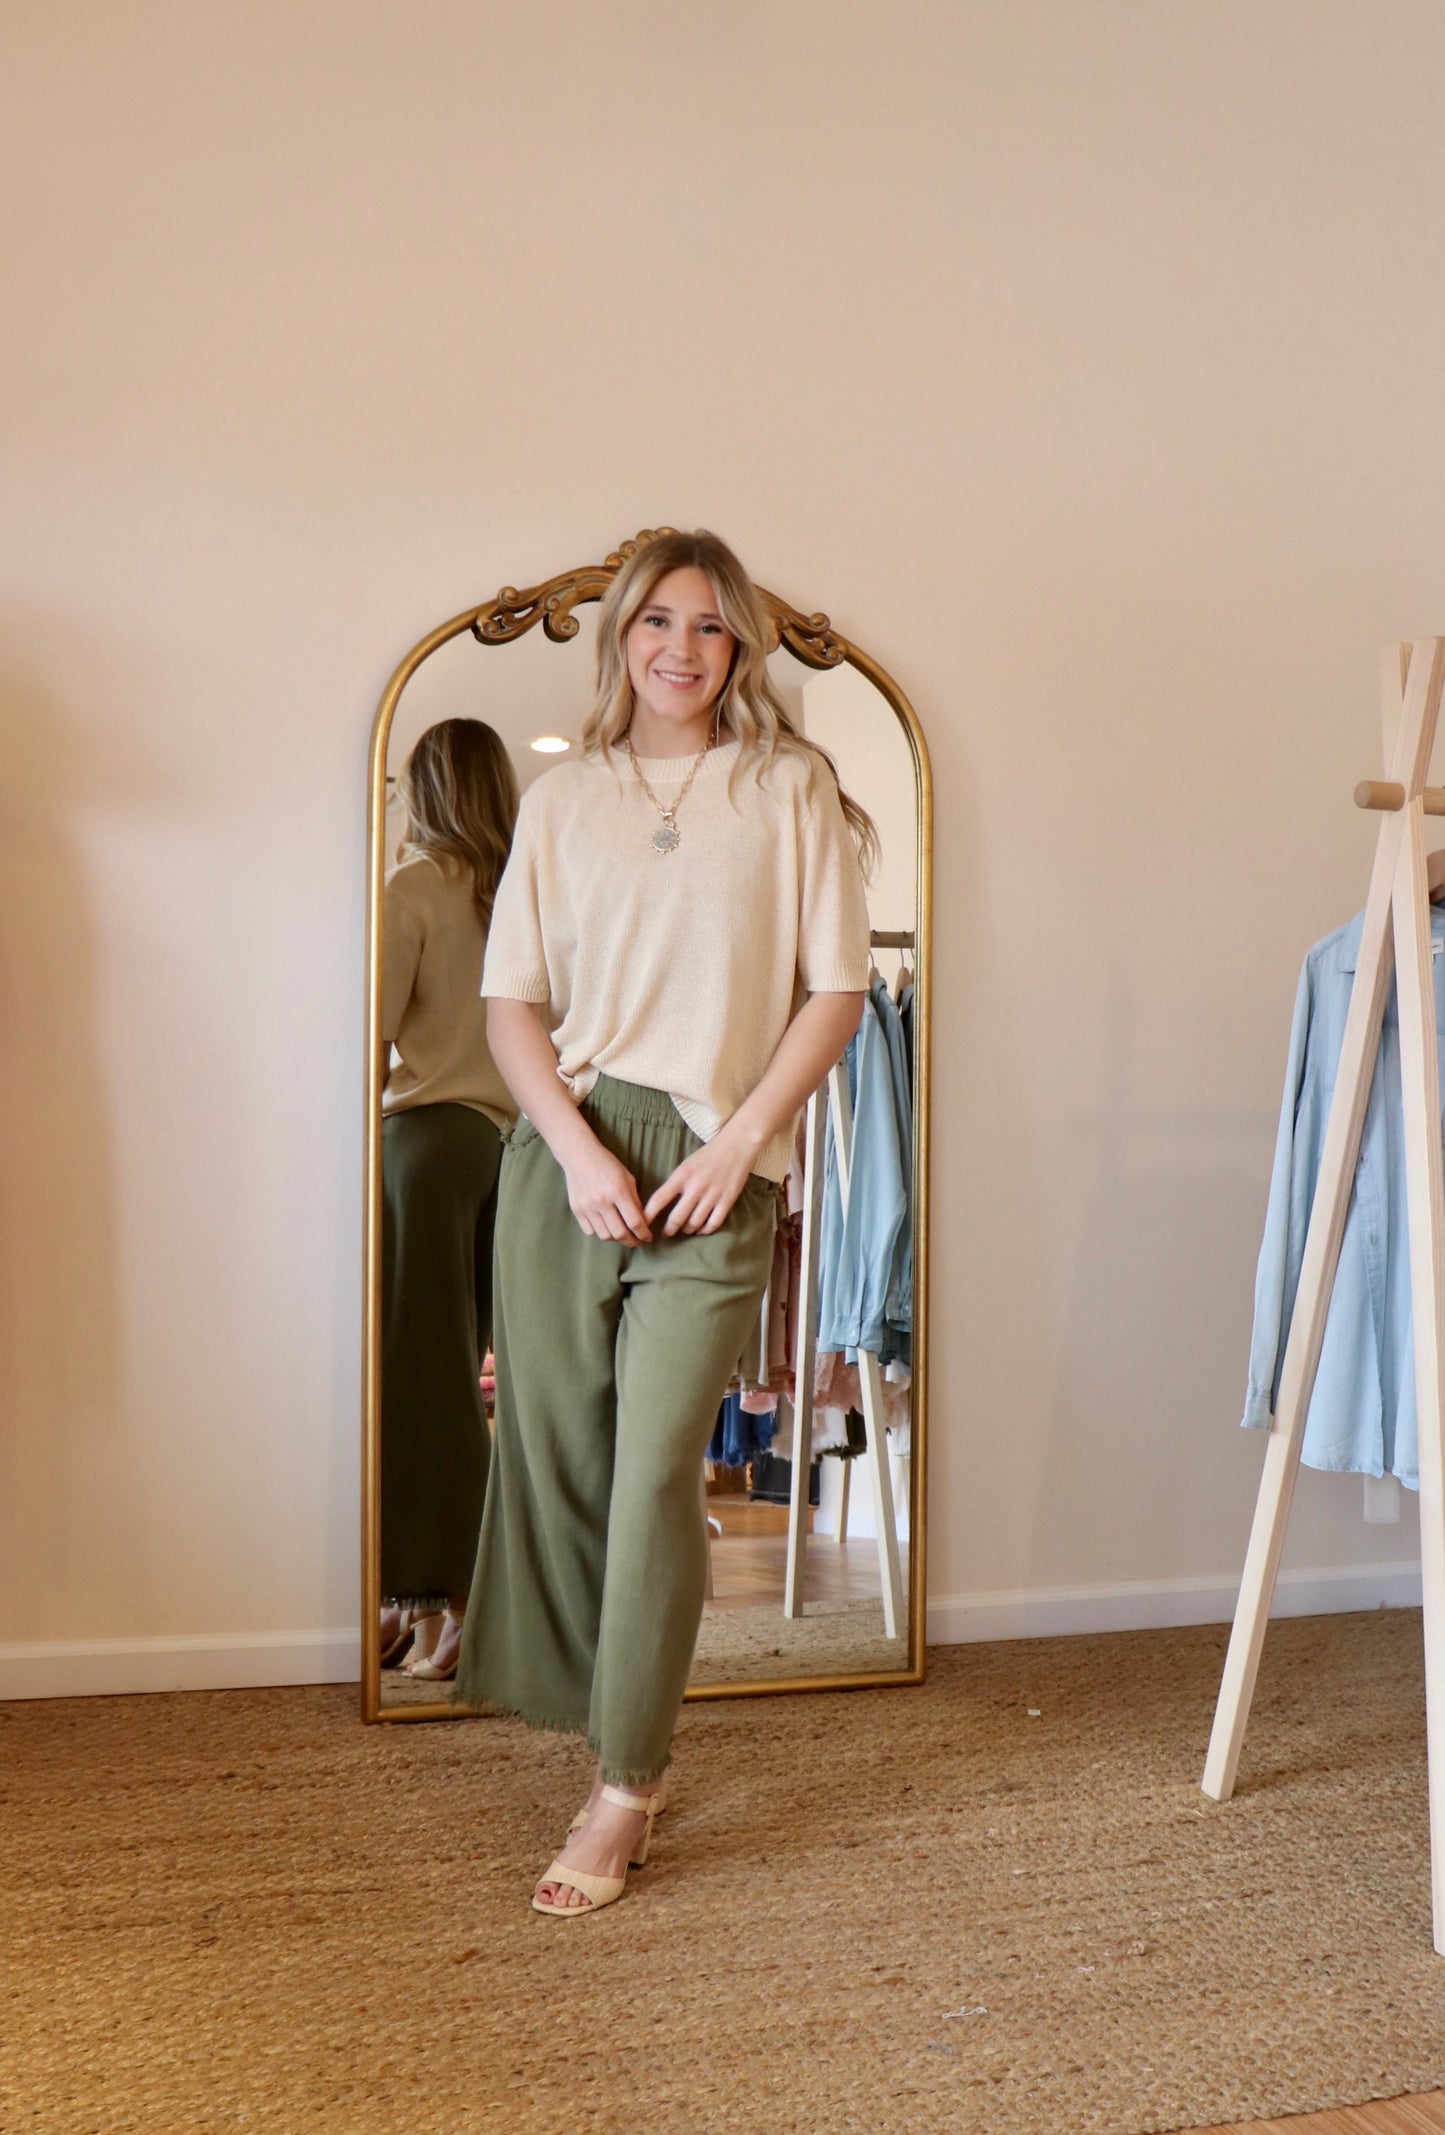 Cabana Linen Pant in Olive